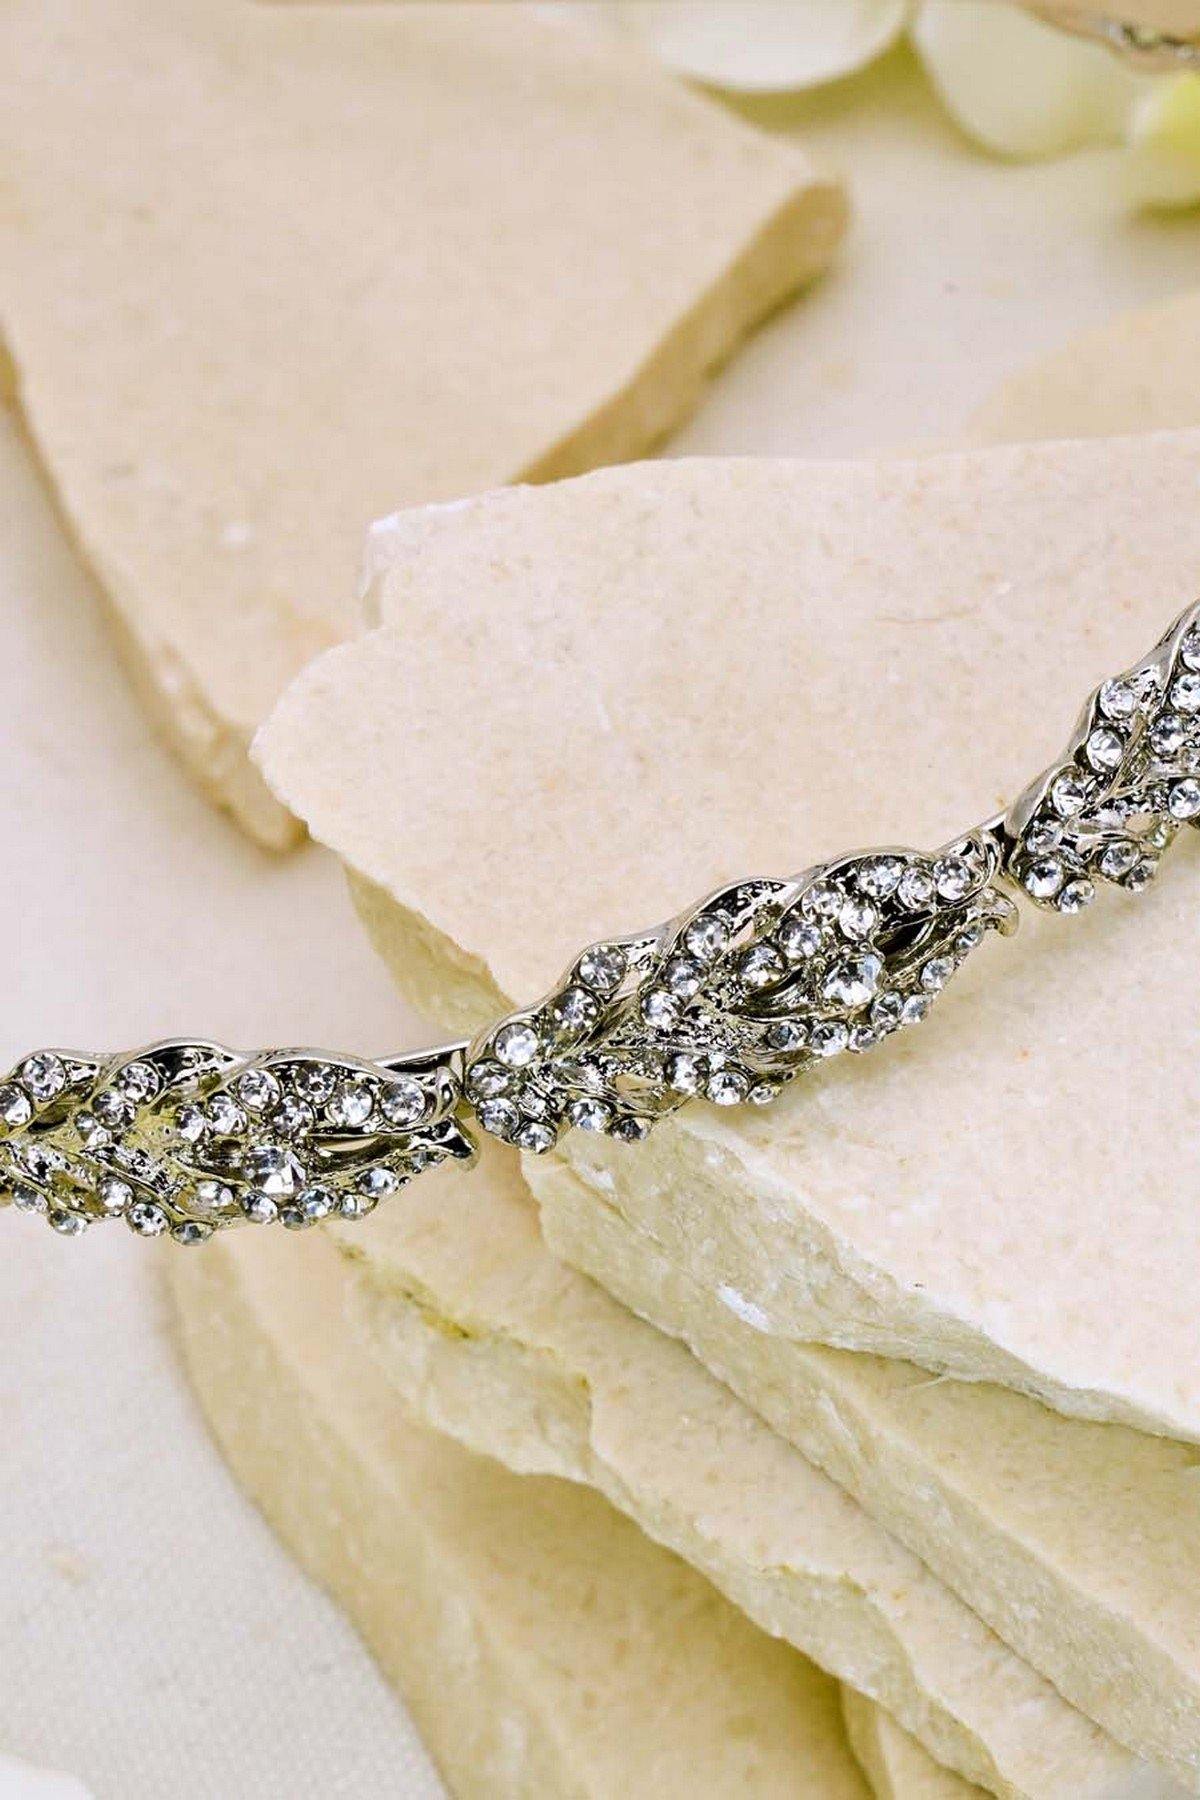 Wedding Crystal Headband Bridal Hair Accessories - The Dress Outlet